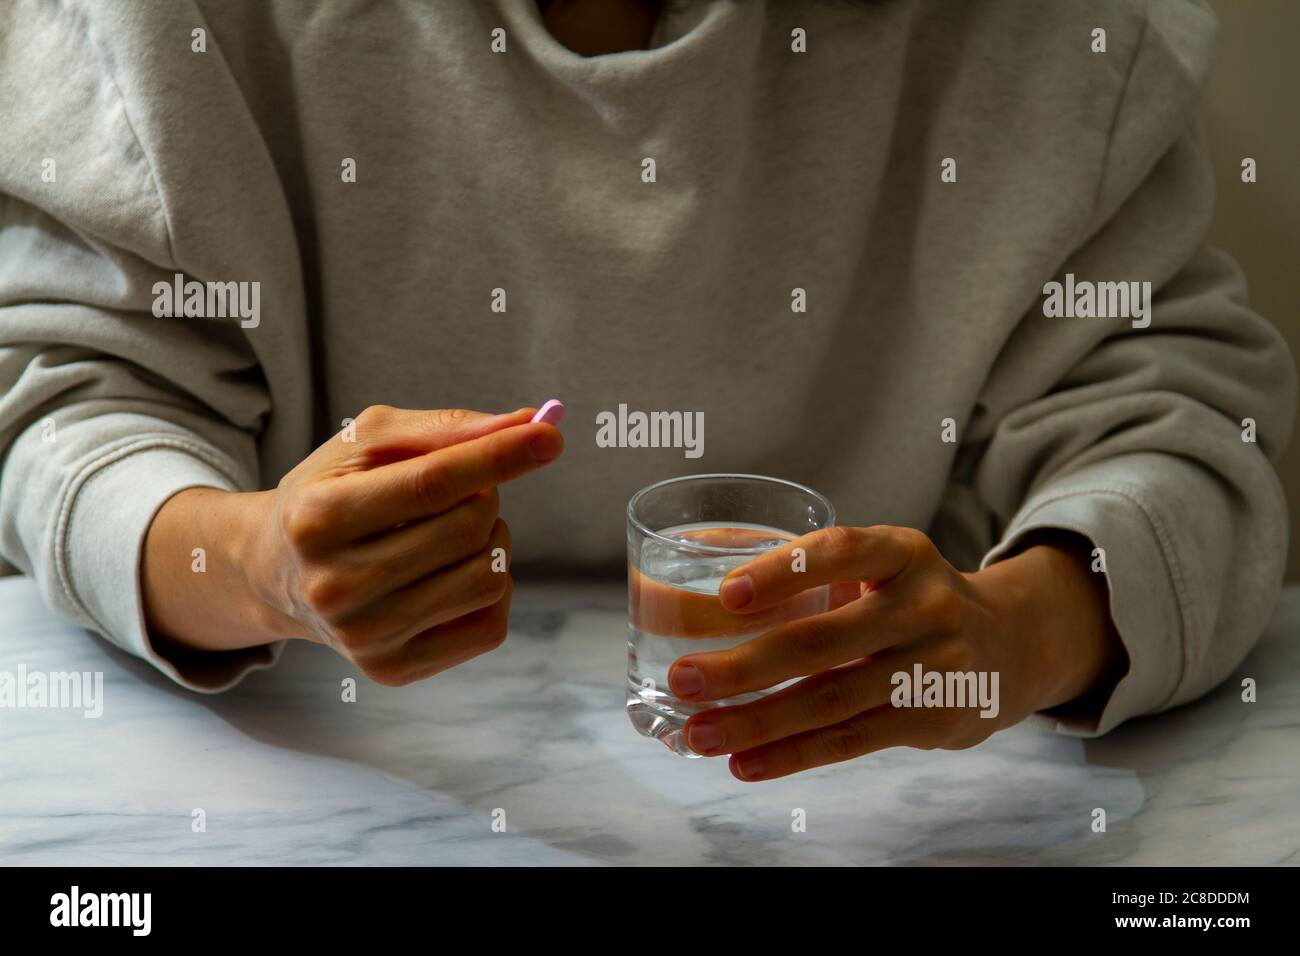 A woman is seen as she is holding a pill in one hand and a glass of water on the other hand. She is about to take the medication with a sip of water. Stock Photo